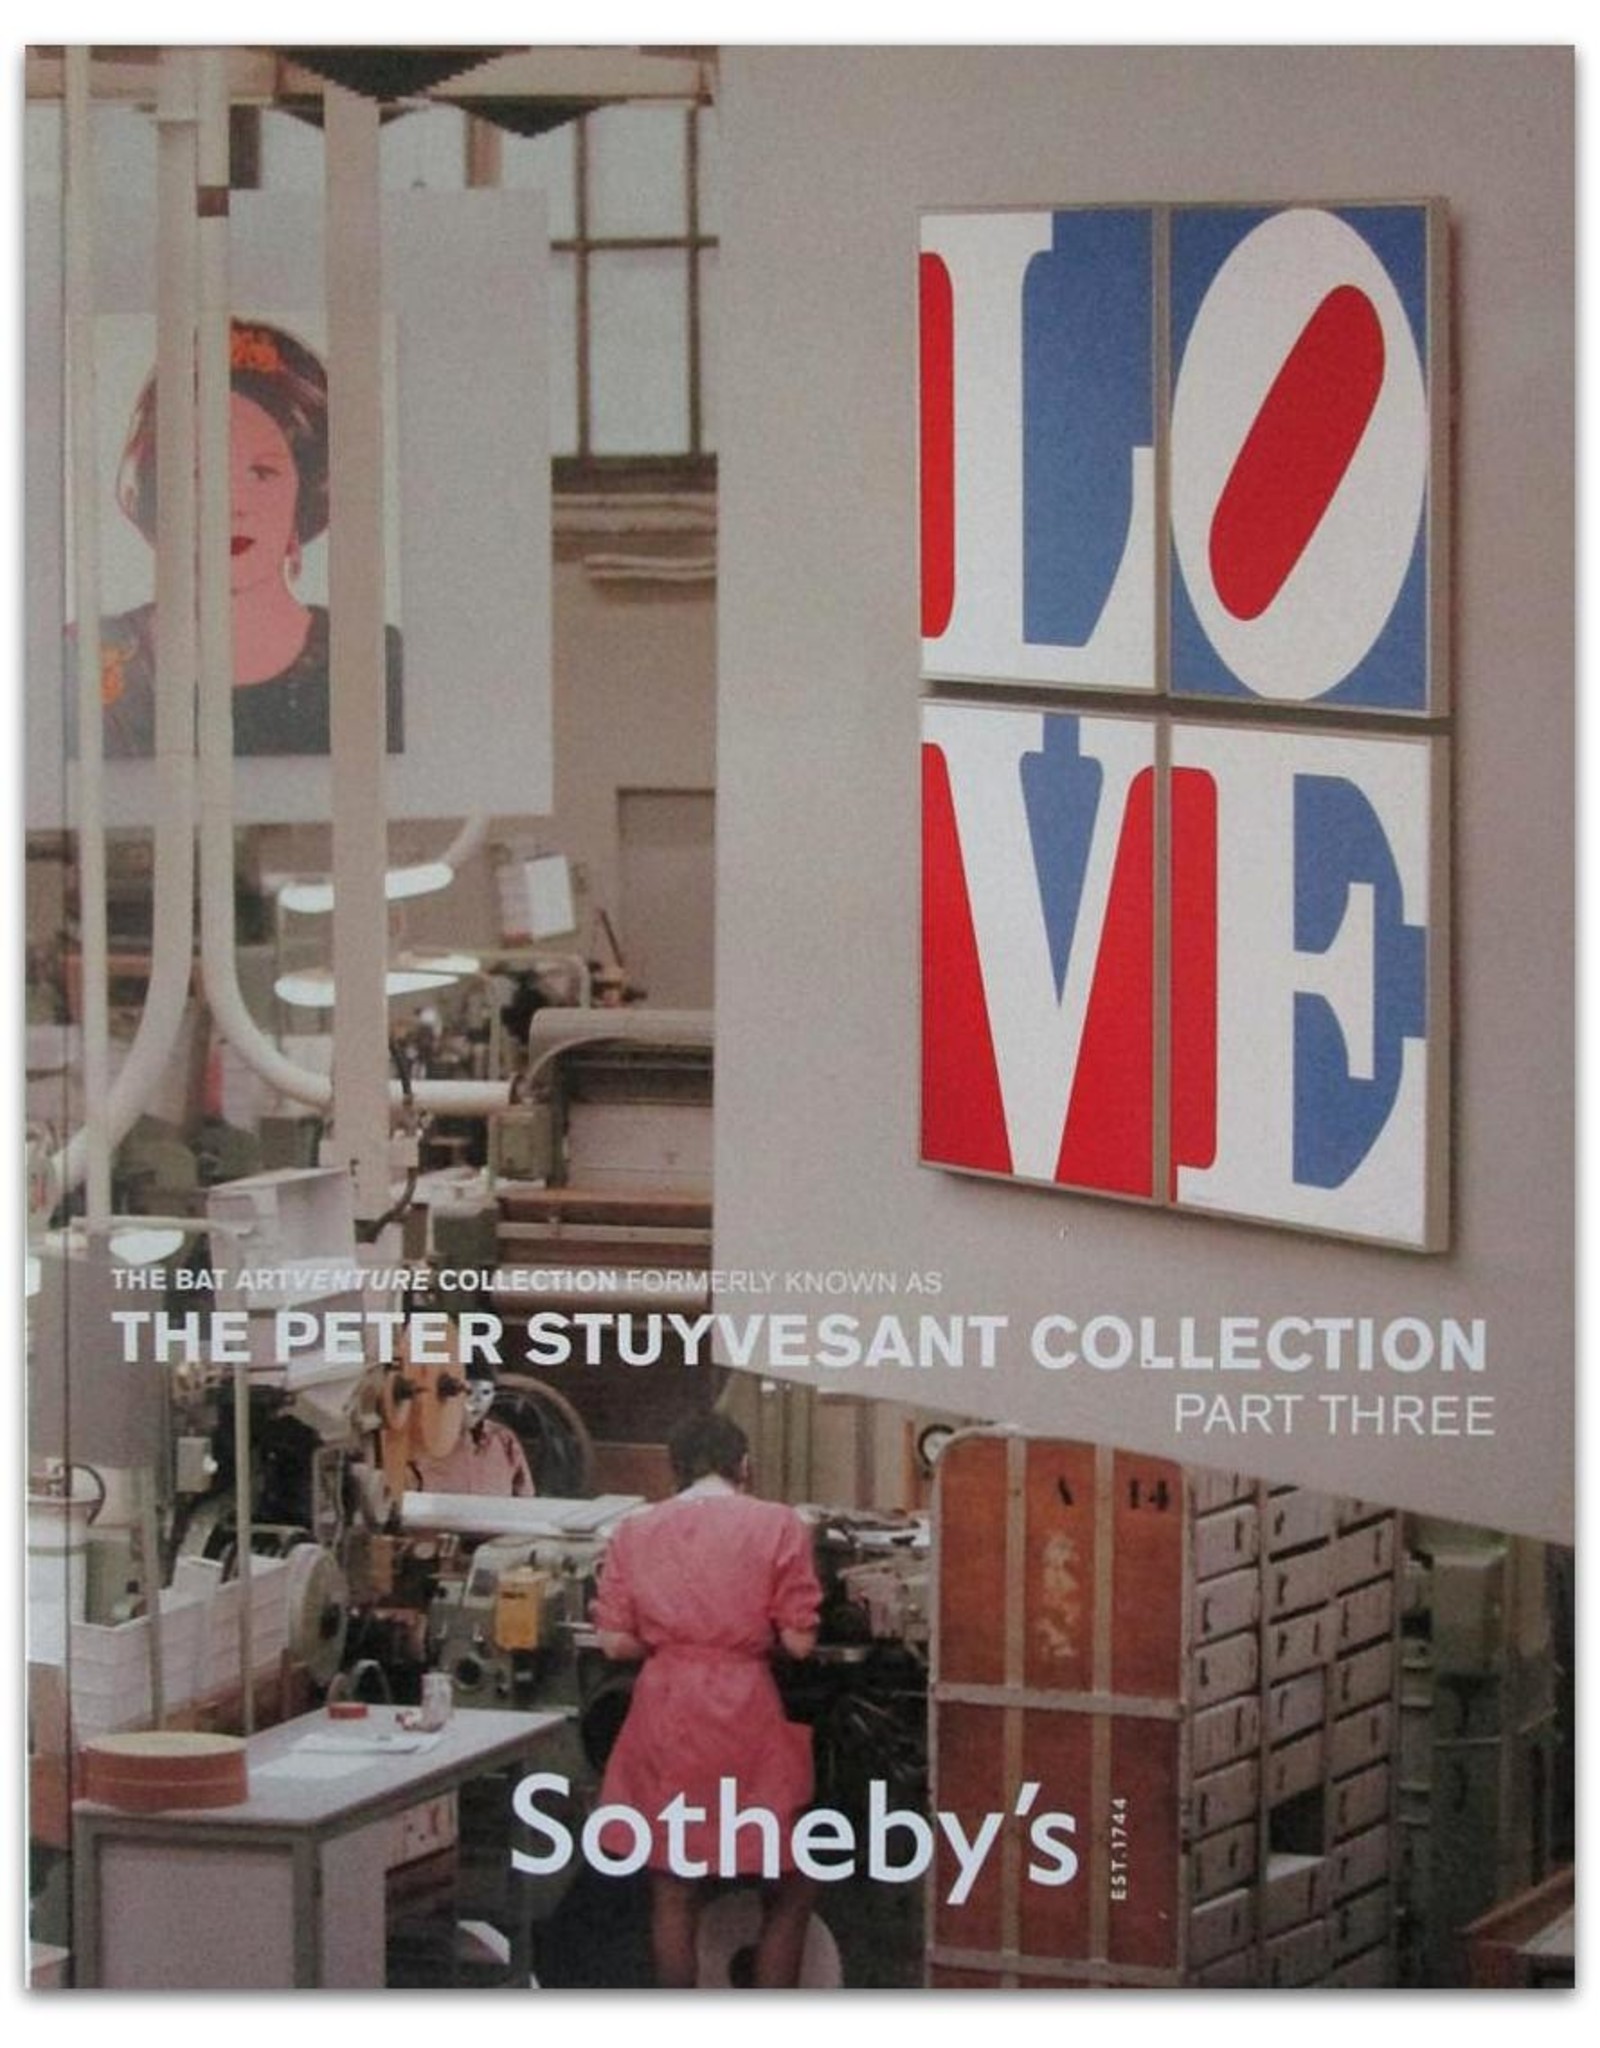 Sotheby's - The Bat Artventure Collection formerly known as The Peter Stuyvesant Collection